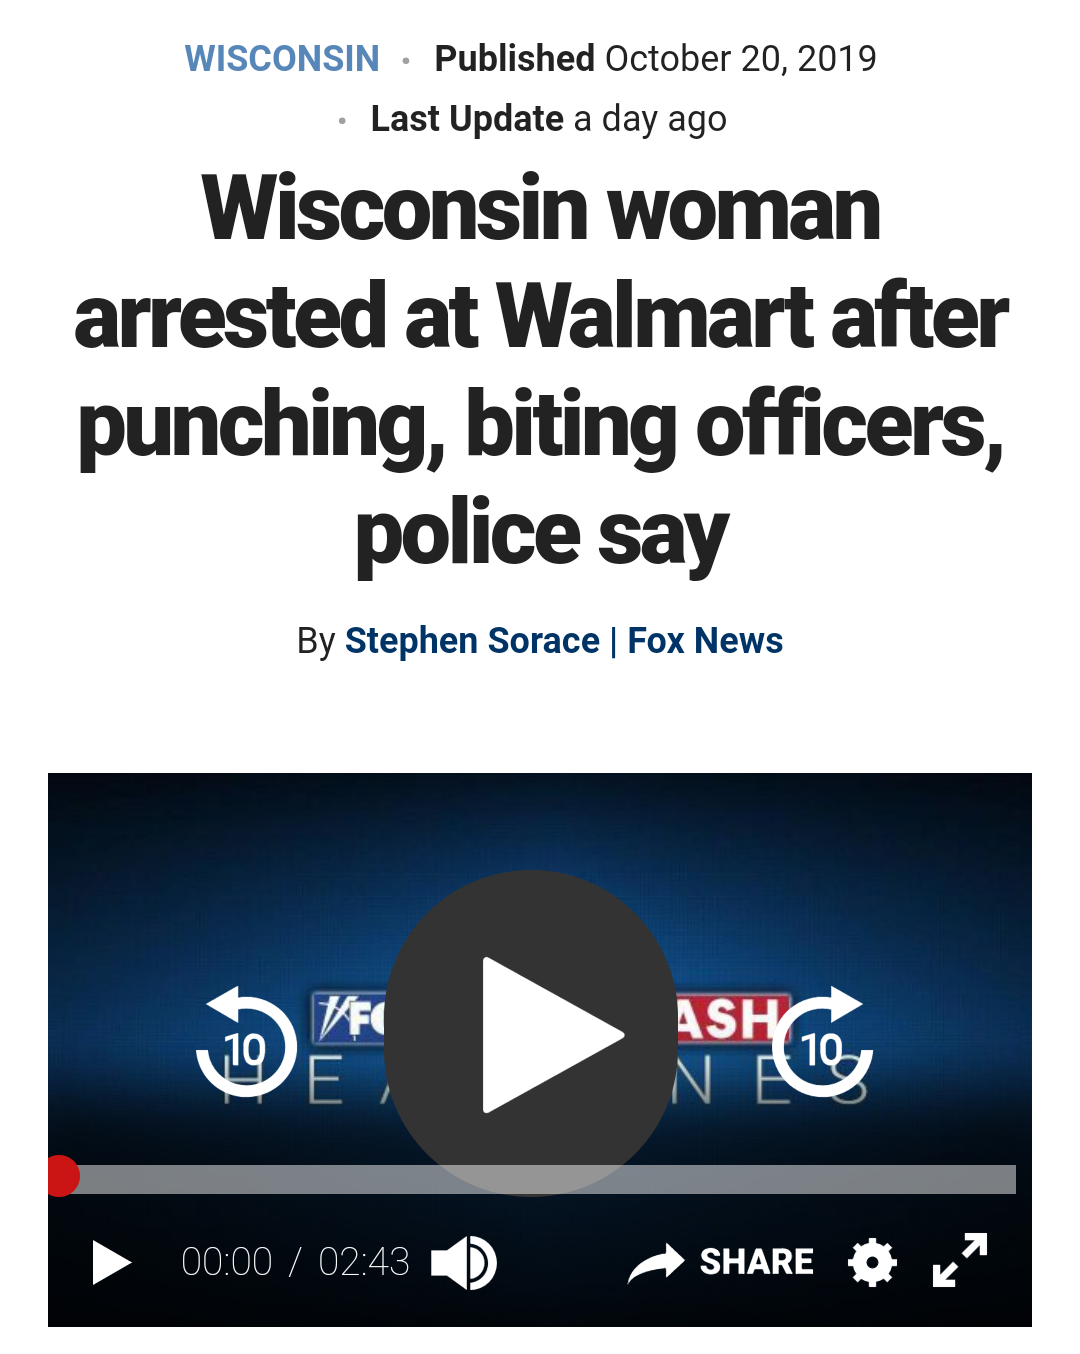 walmart - Wisconsin Published Last Update a day ago Wisconsin woman arrested at Walmart after punching, biting officers, police say By Stephen Sorace | Fox News D